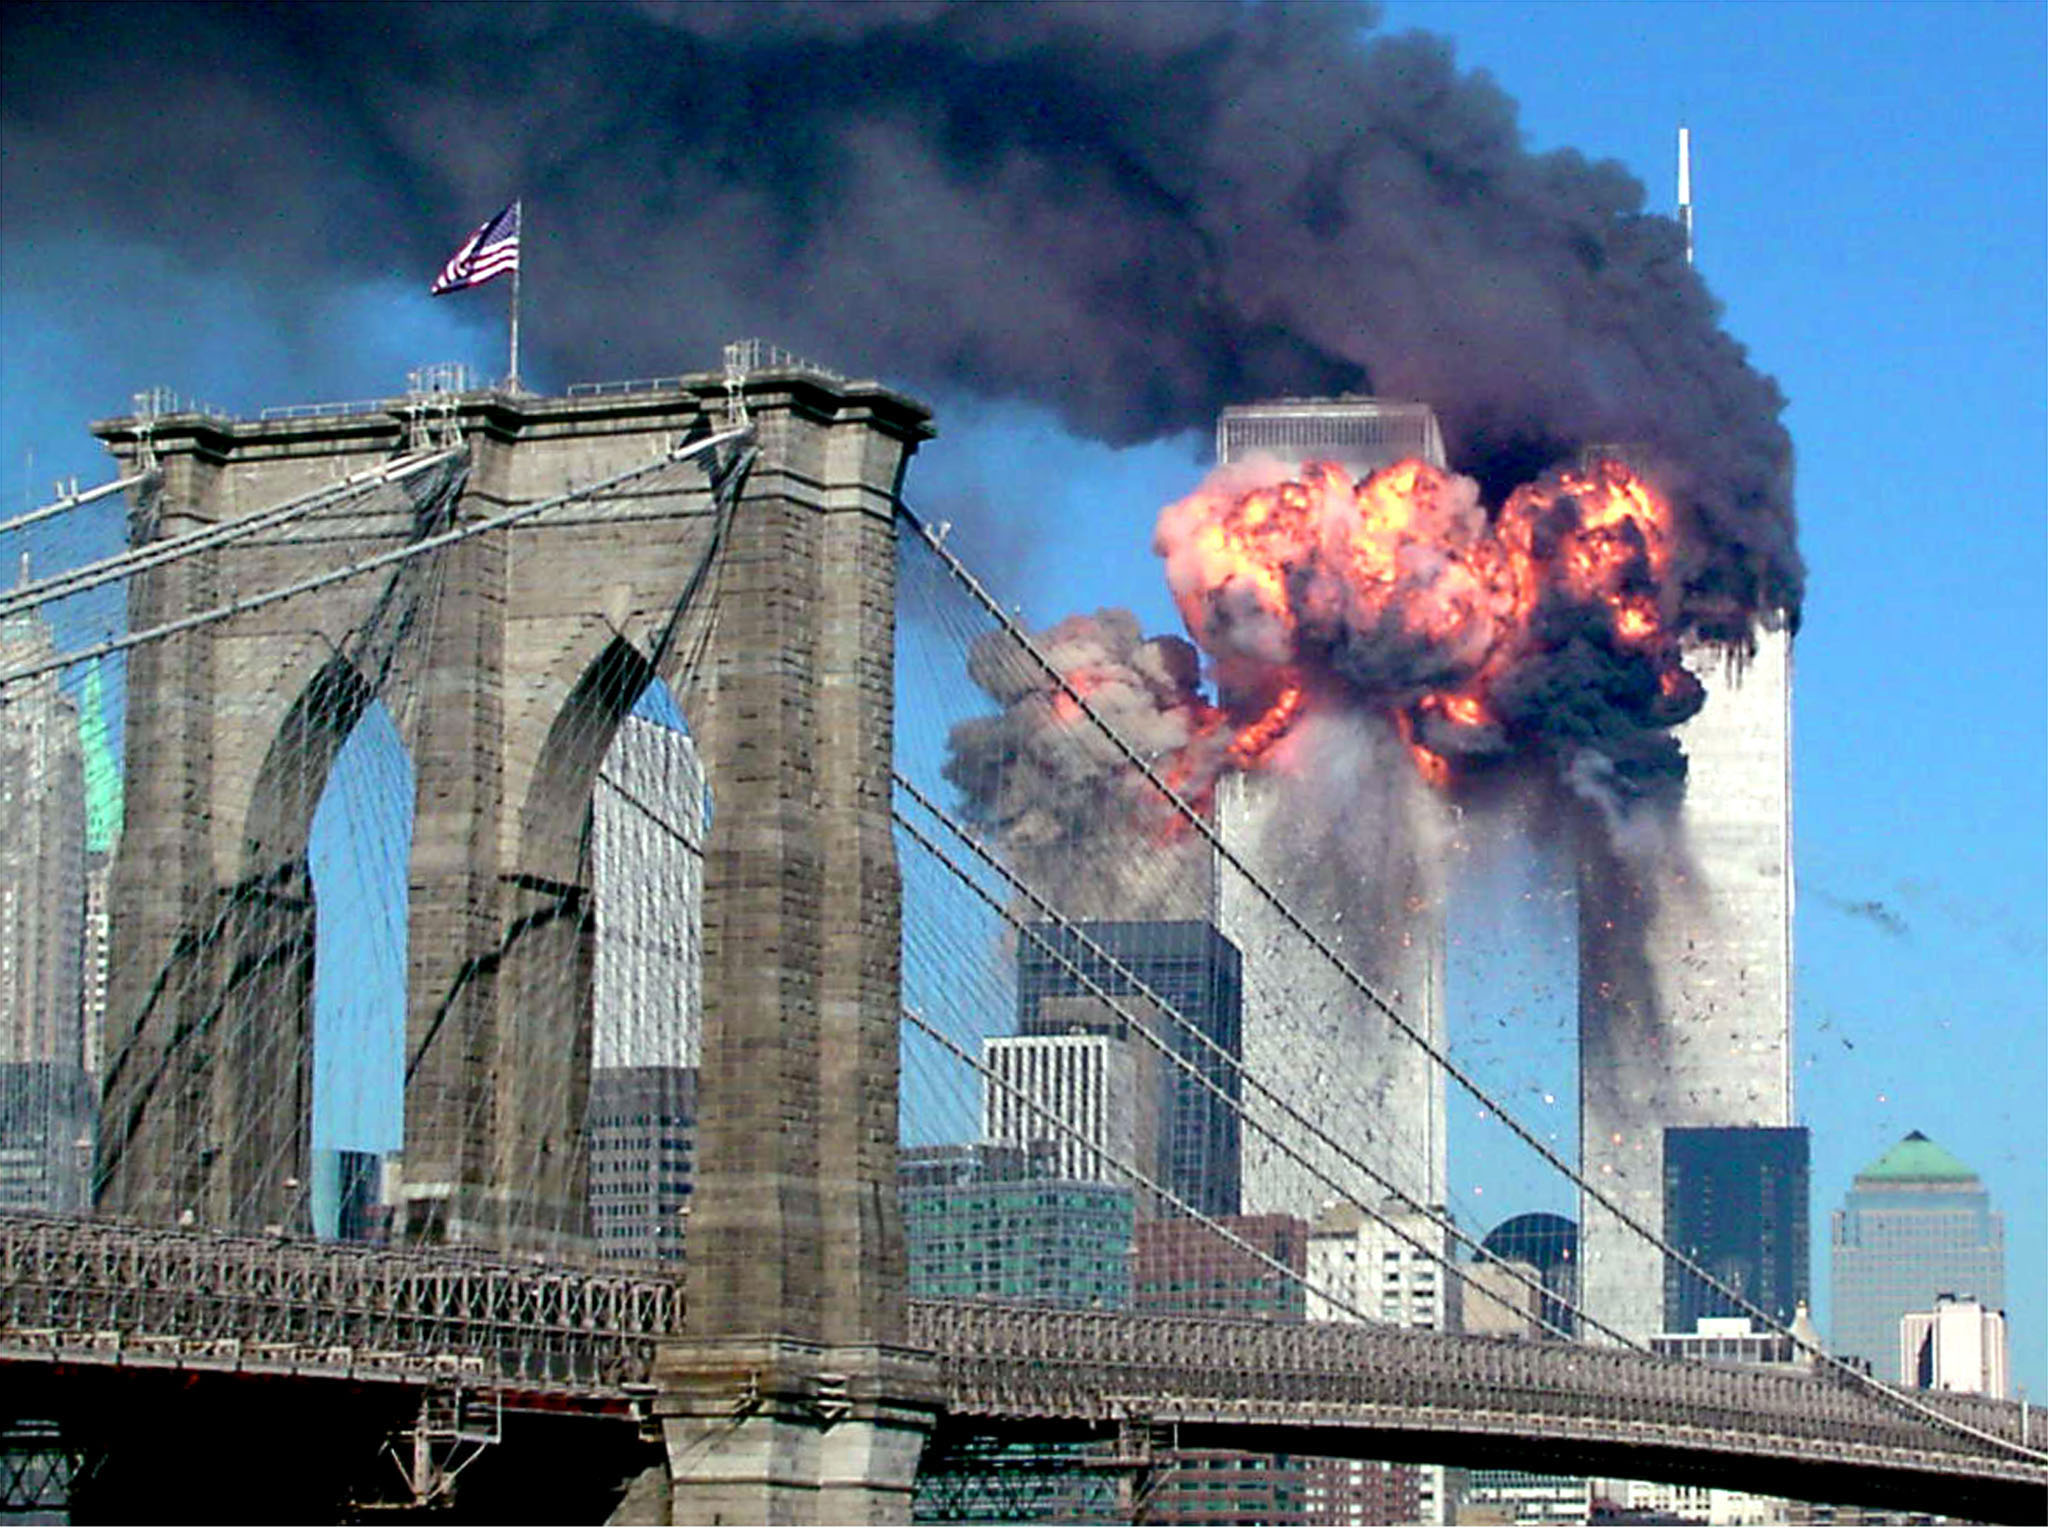 We must never forget 9/11